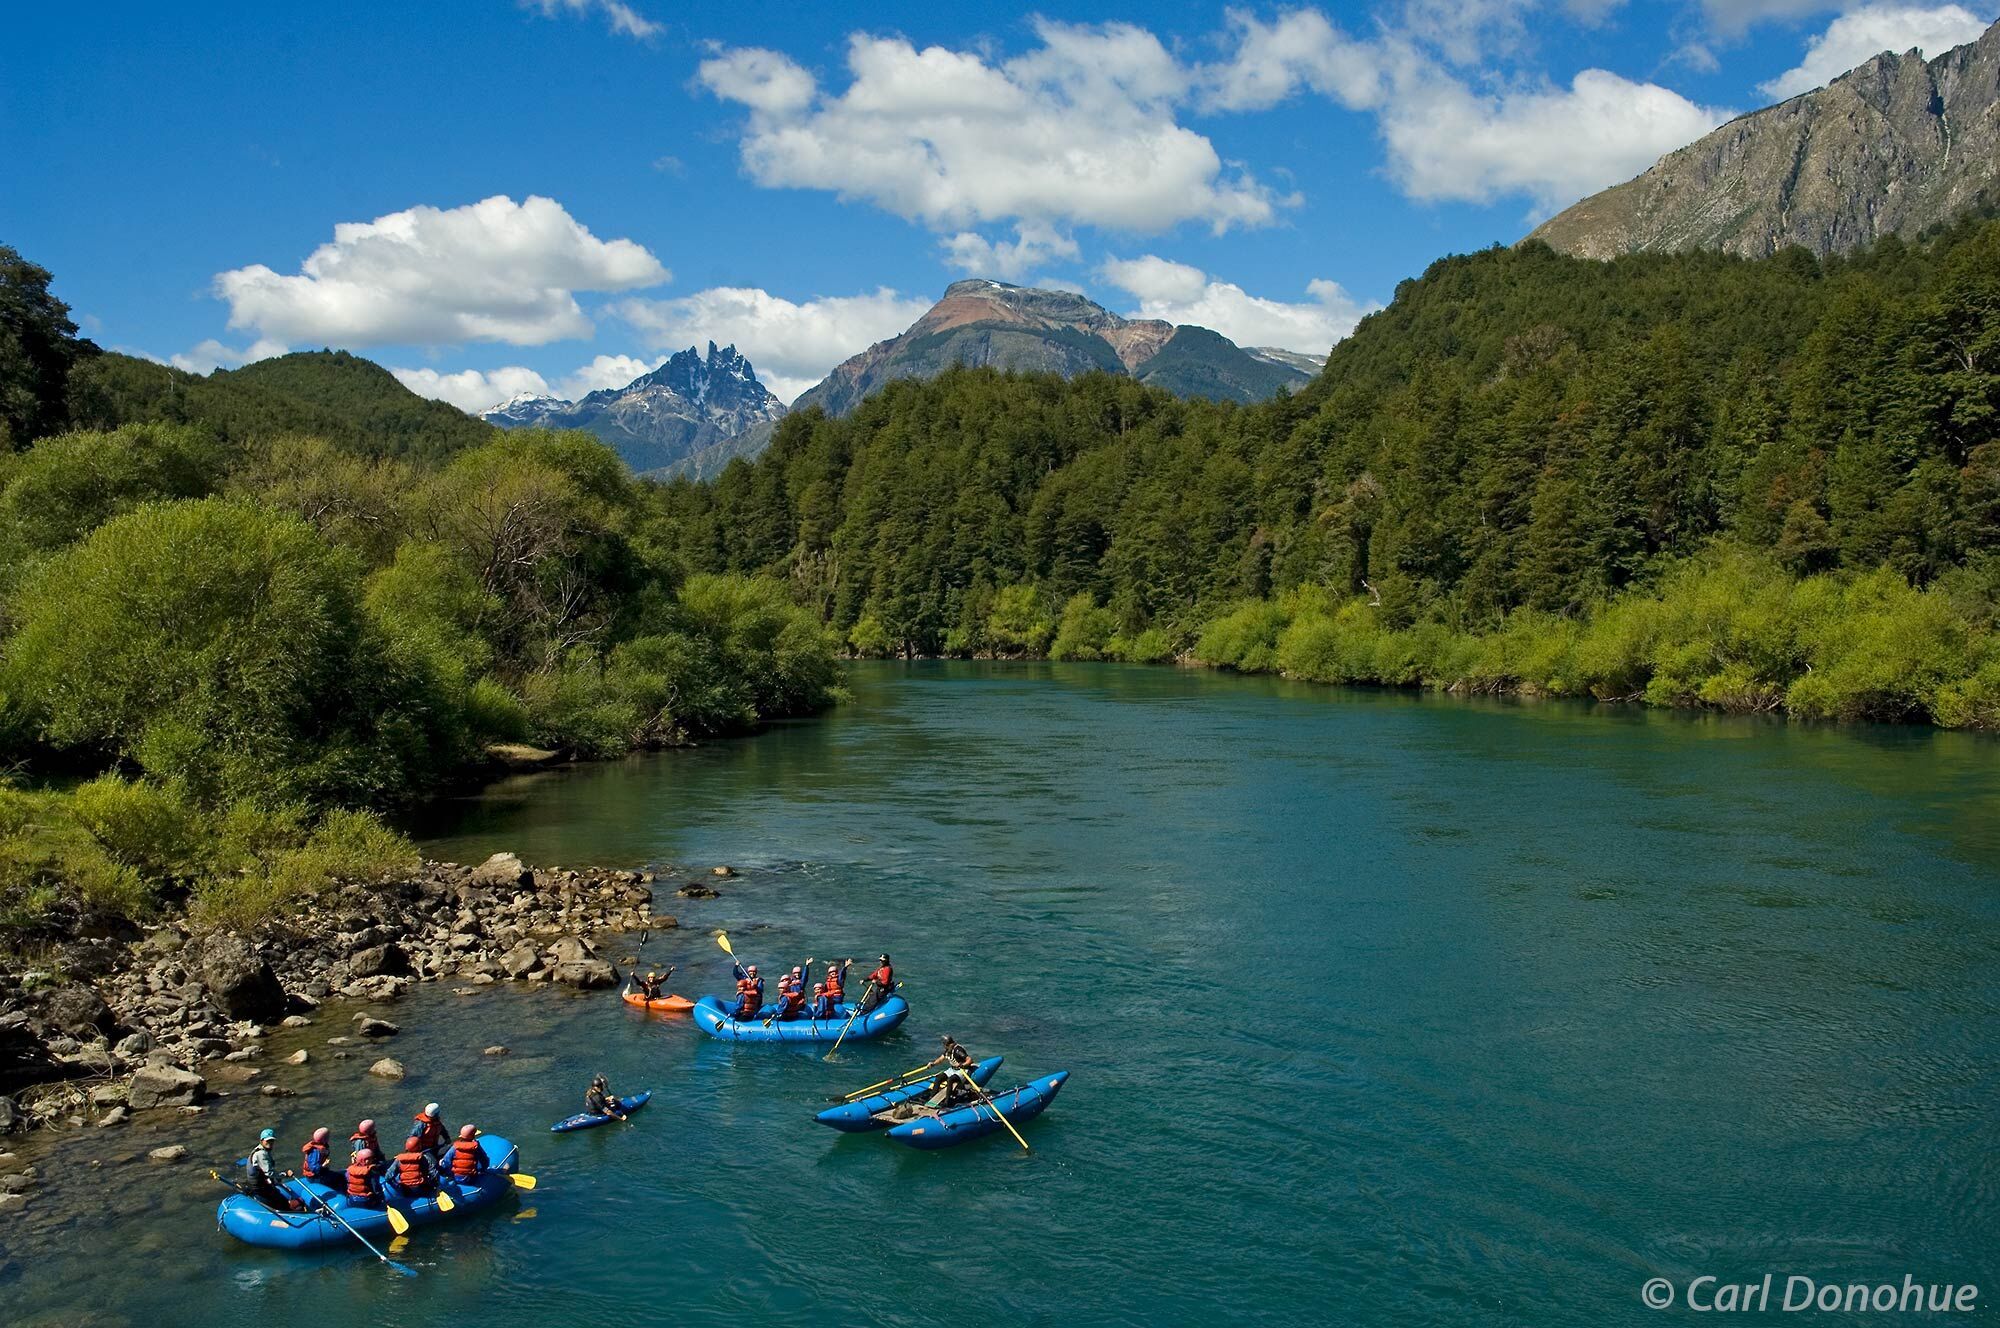 Whitewater rafting adventure begins. A flatwater section on the Futaleufu River, just above "Zapata", the first rapid on the...